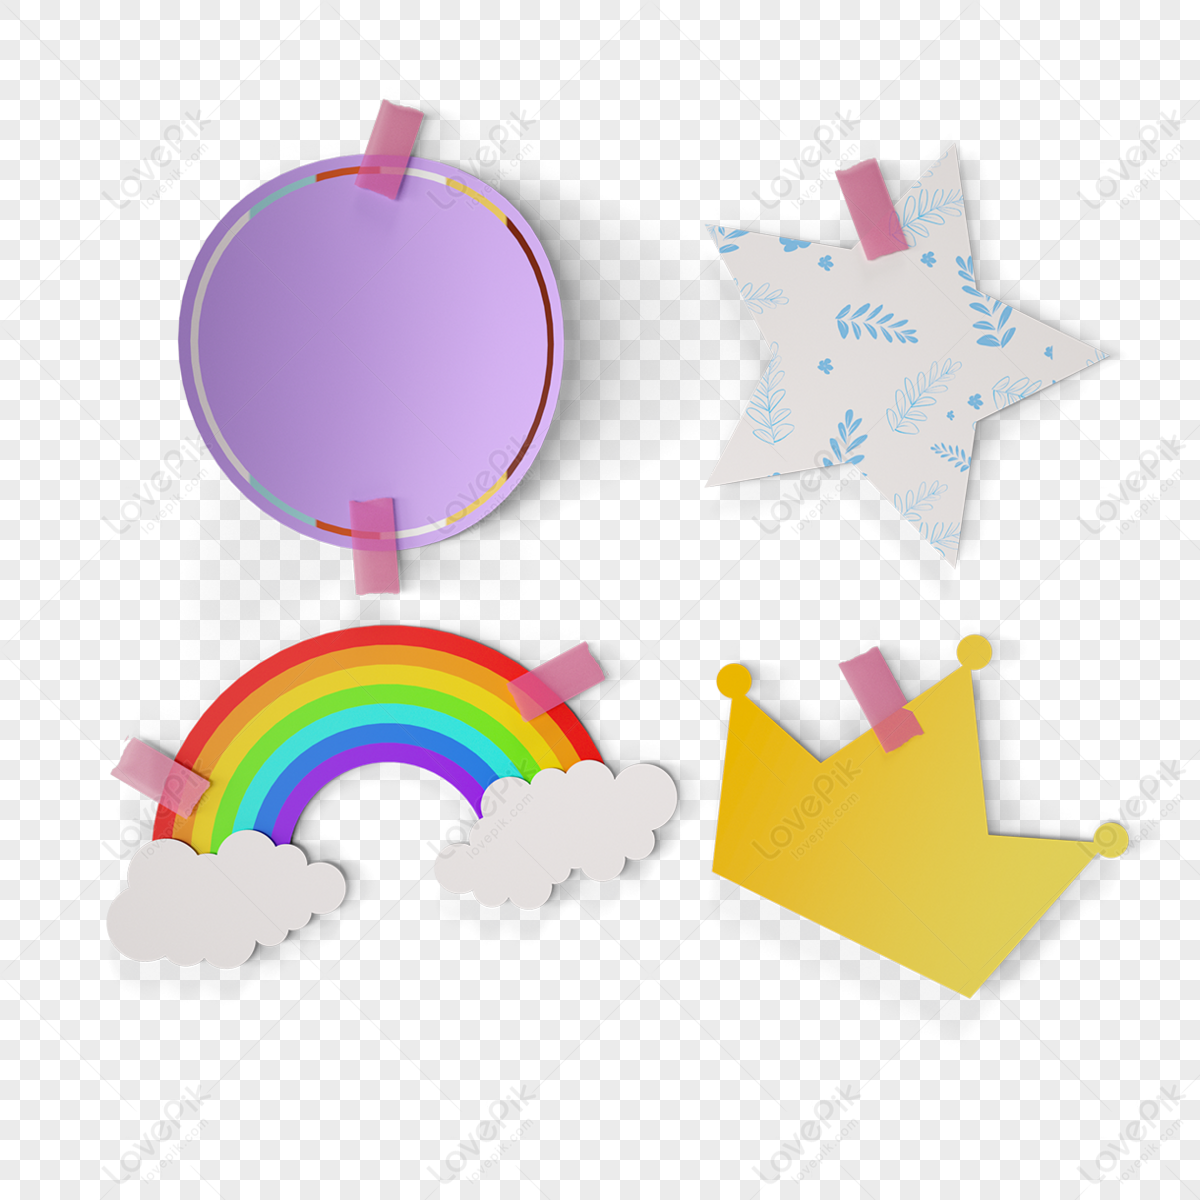 Fresh and cute rainbow notes 3d elements,stereoscopic,character png free download